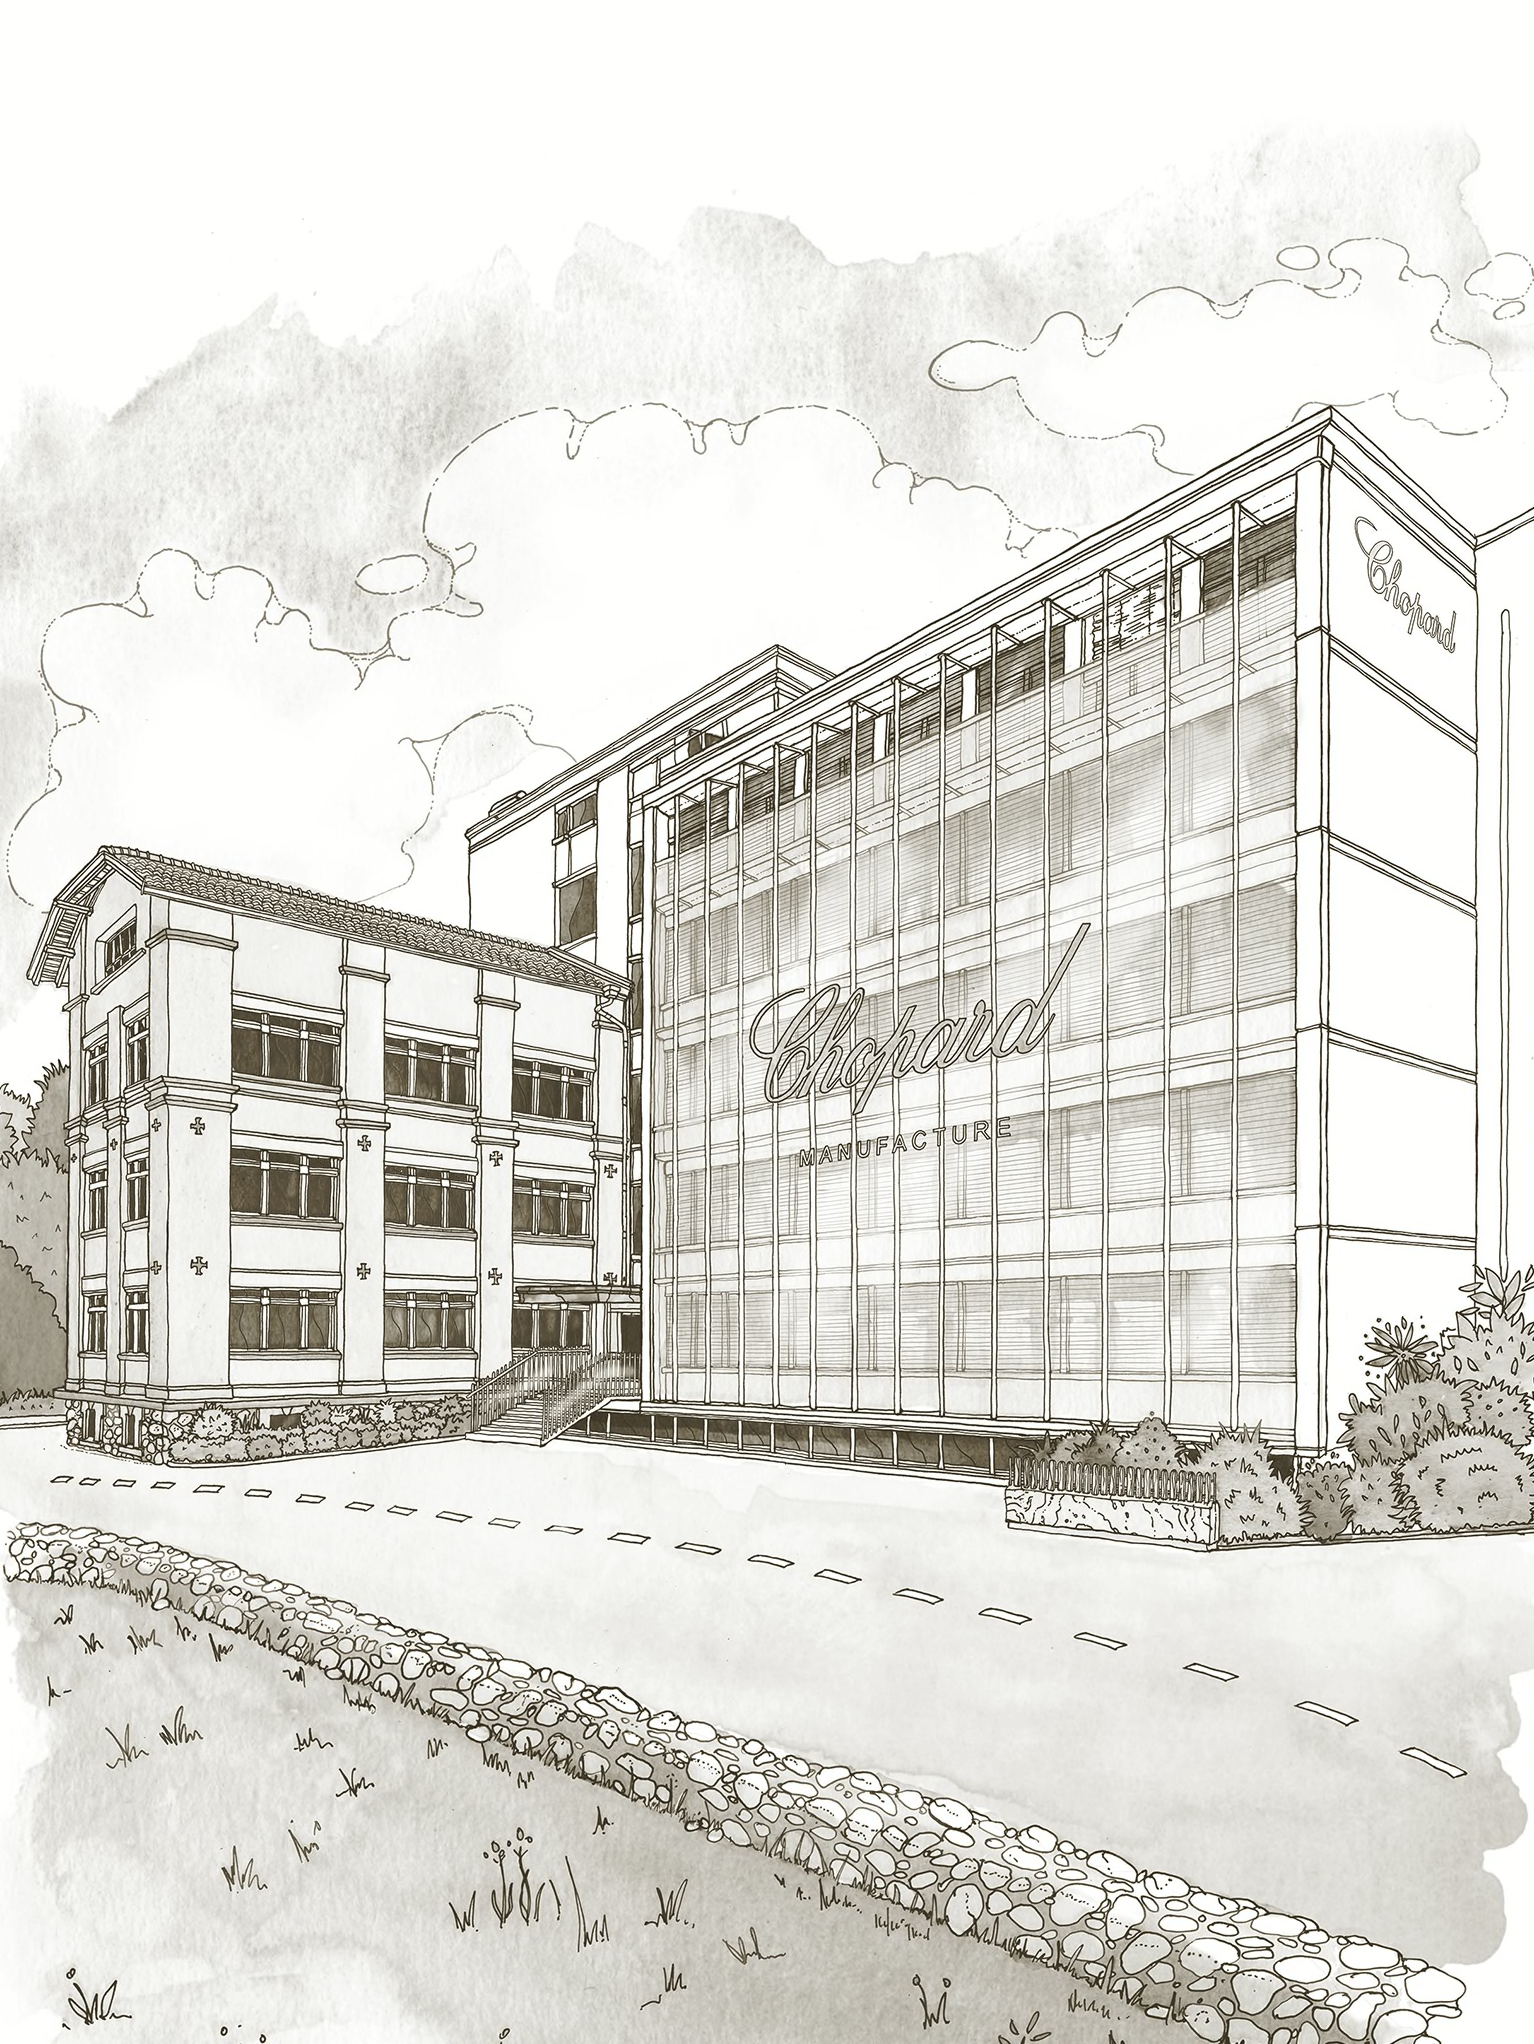 Drawing of Chopard Manufacture building